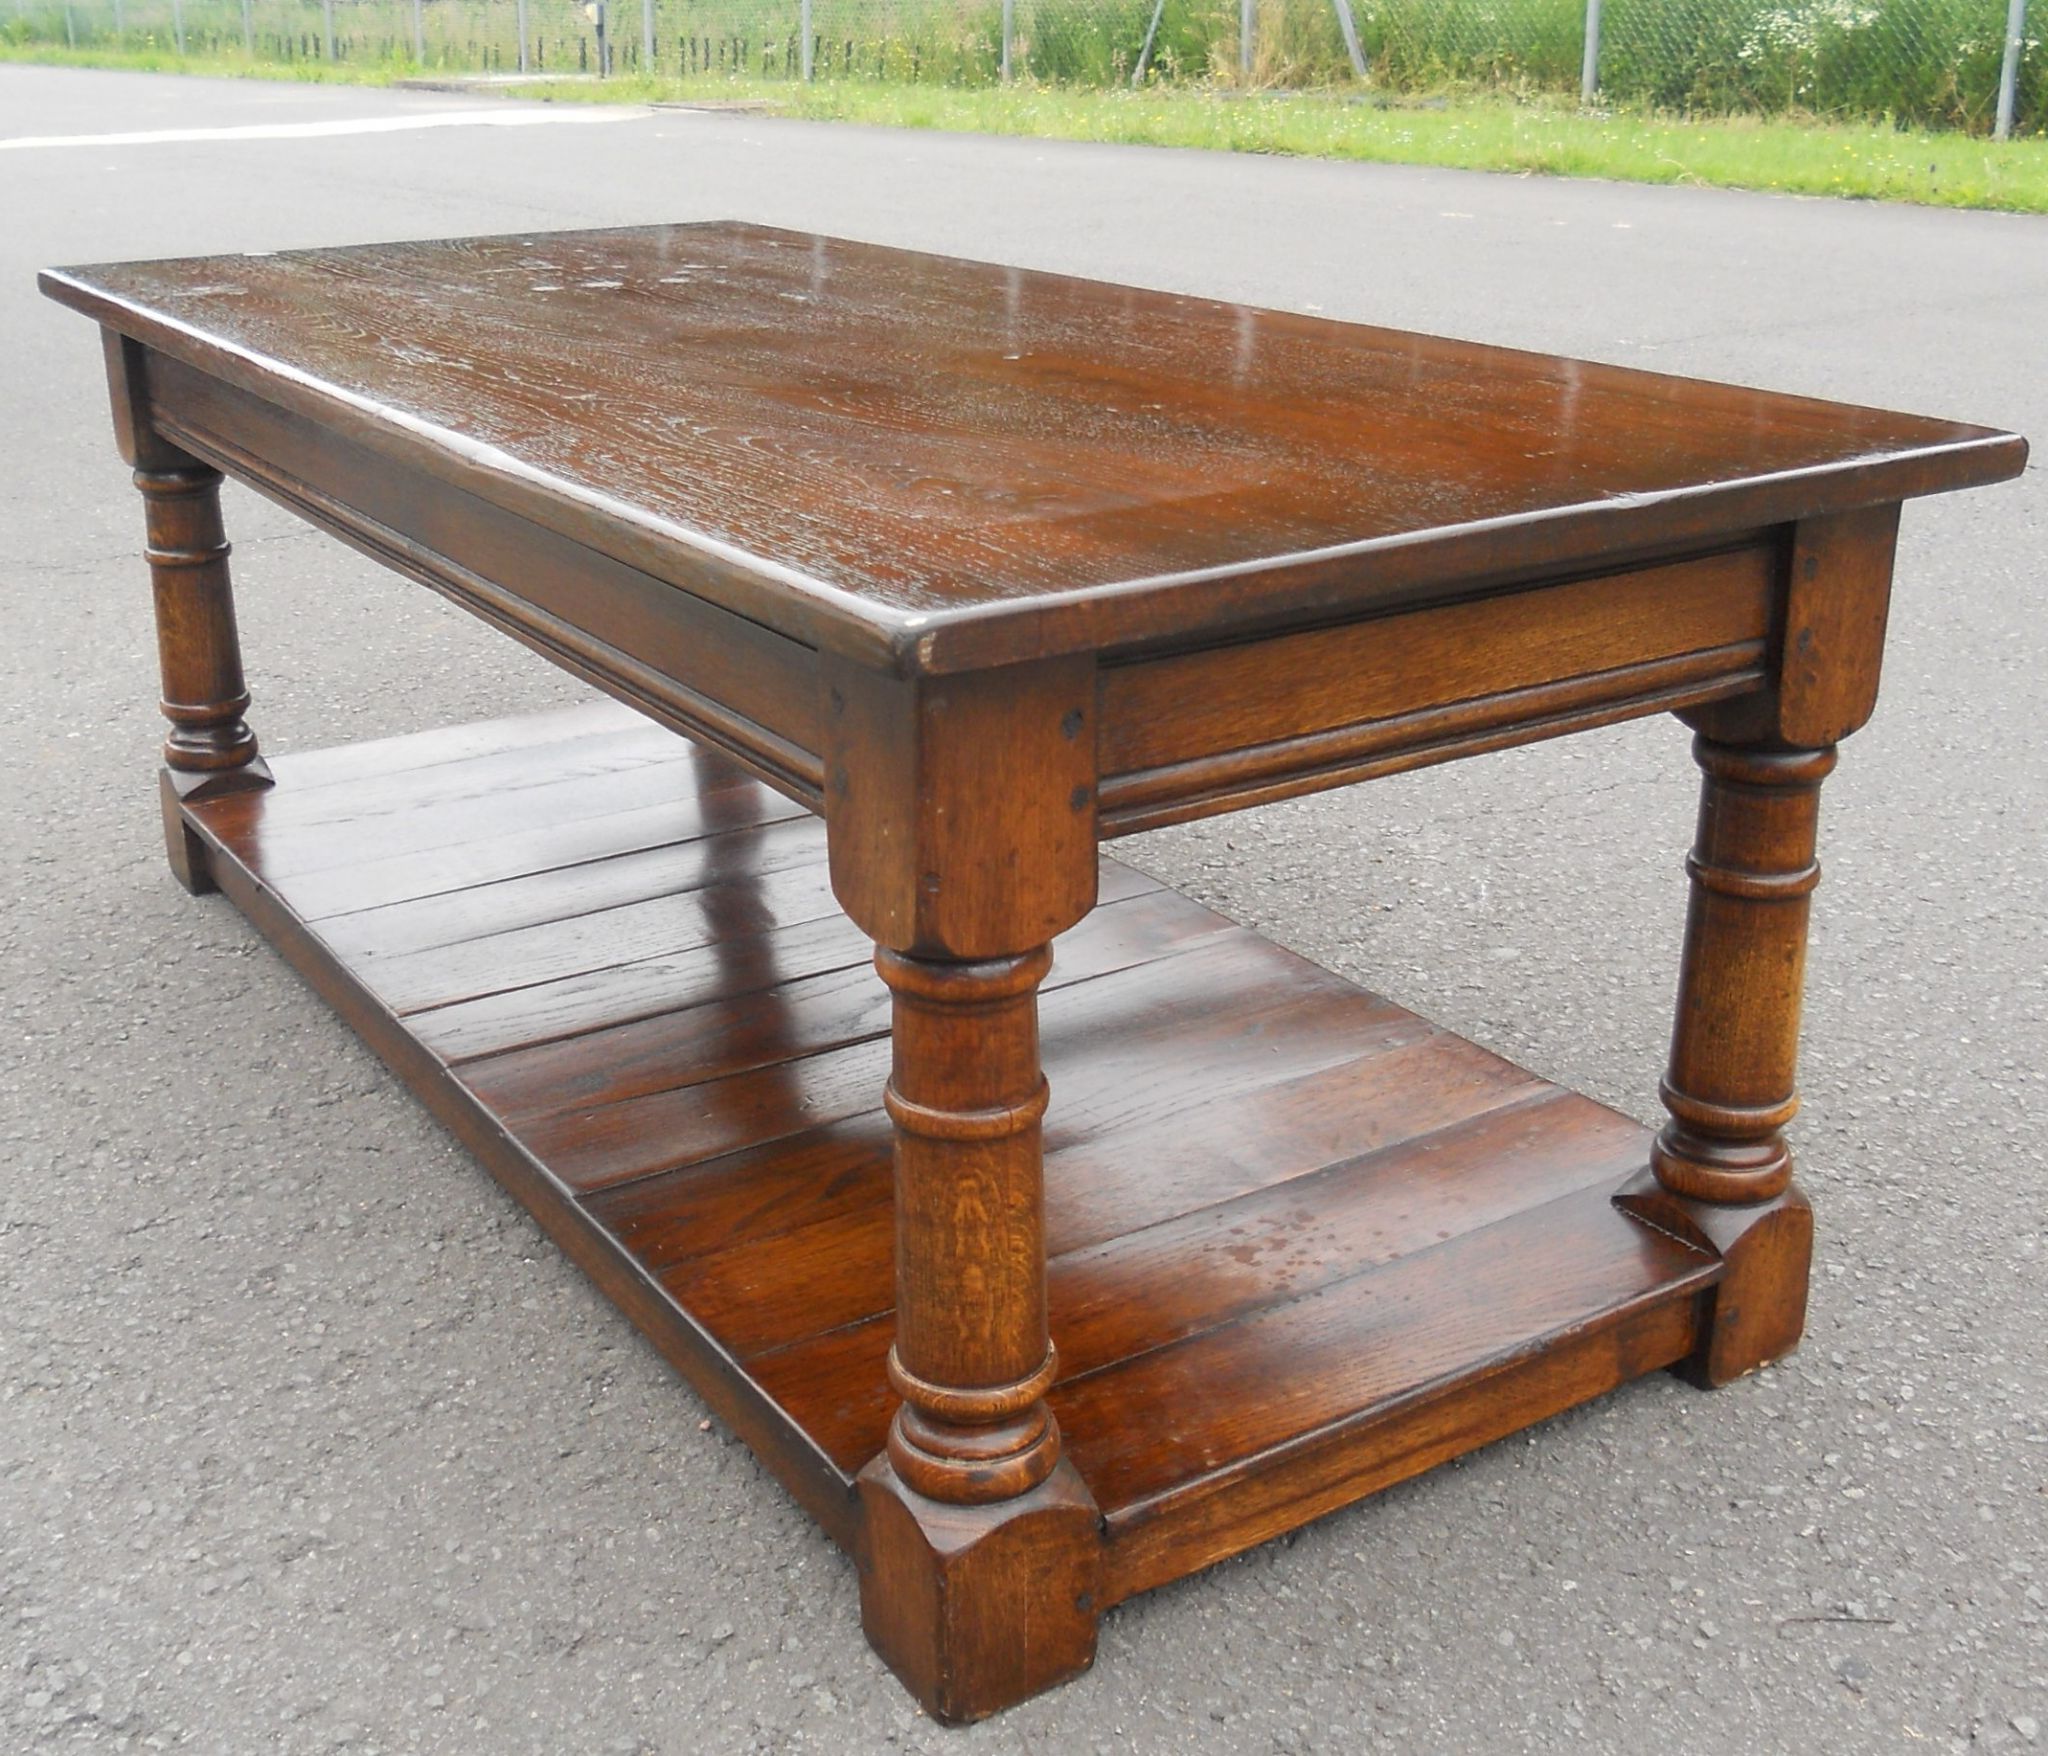 Long Antique Style Oak Coffee Table Intended For Most Popular Vintage Gray Oak Coffee Tables (View 5 of 20)